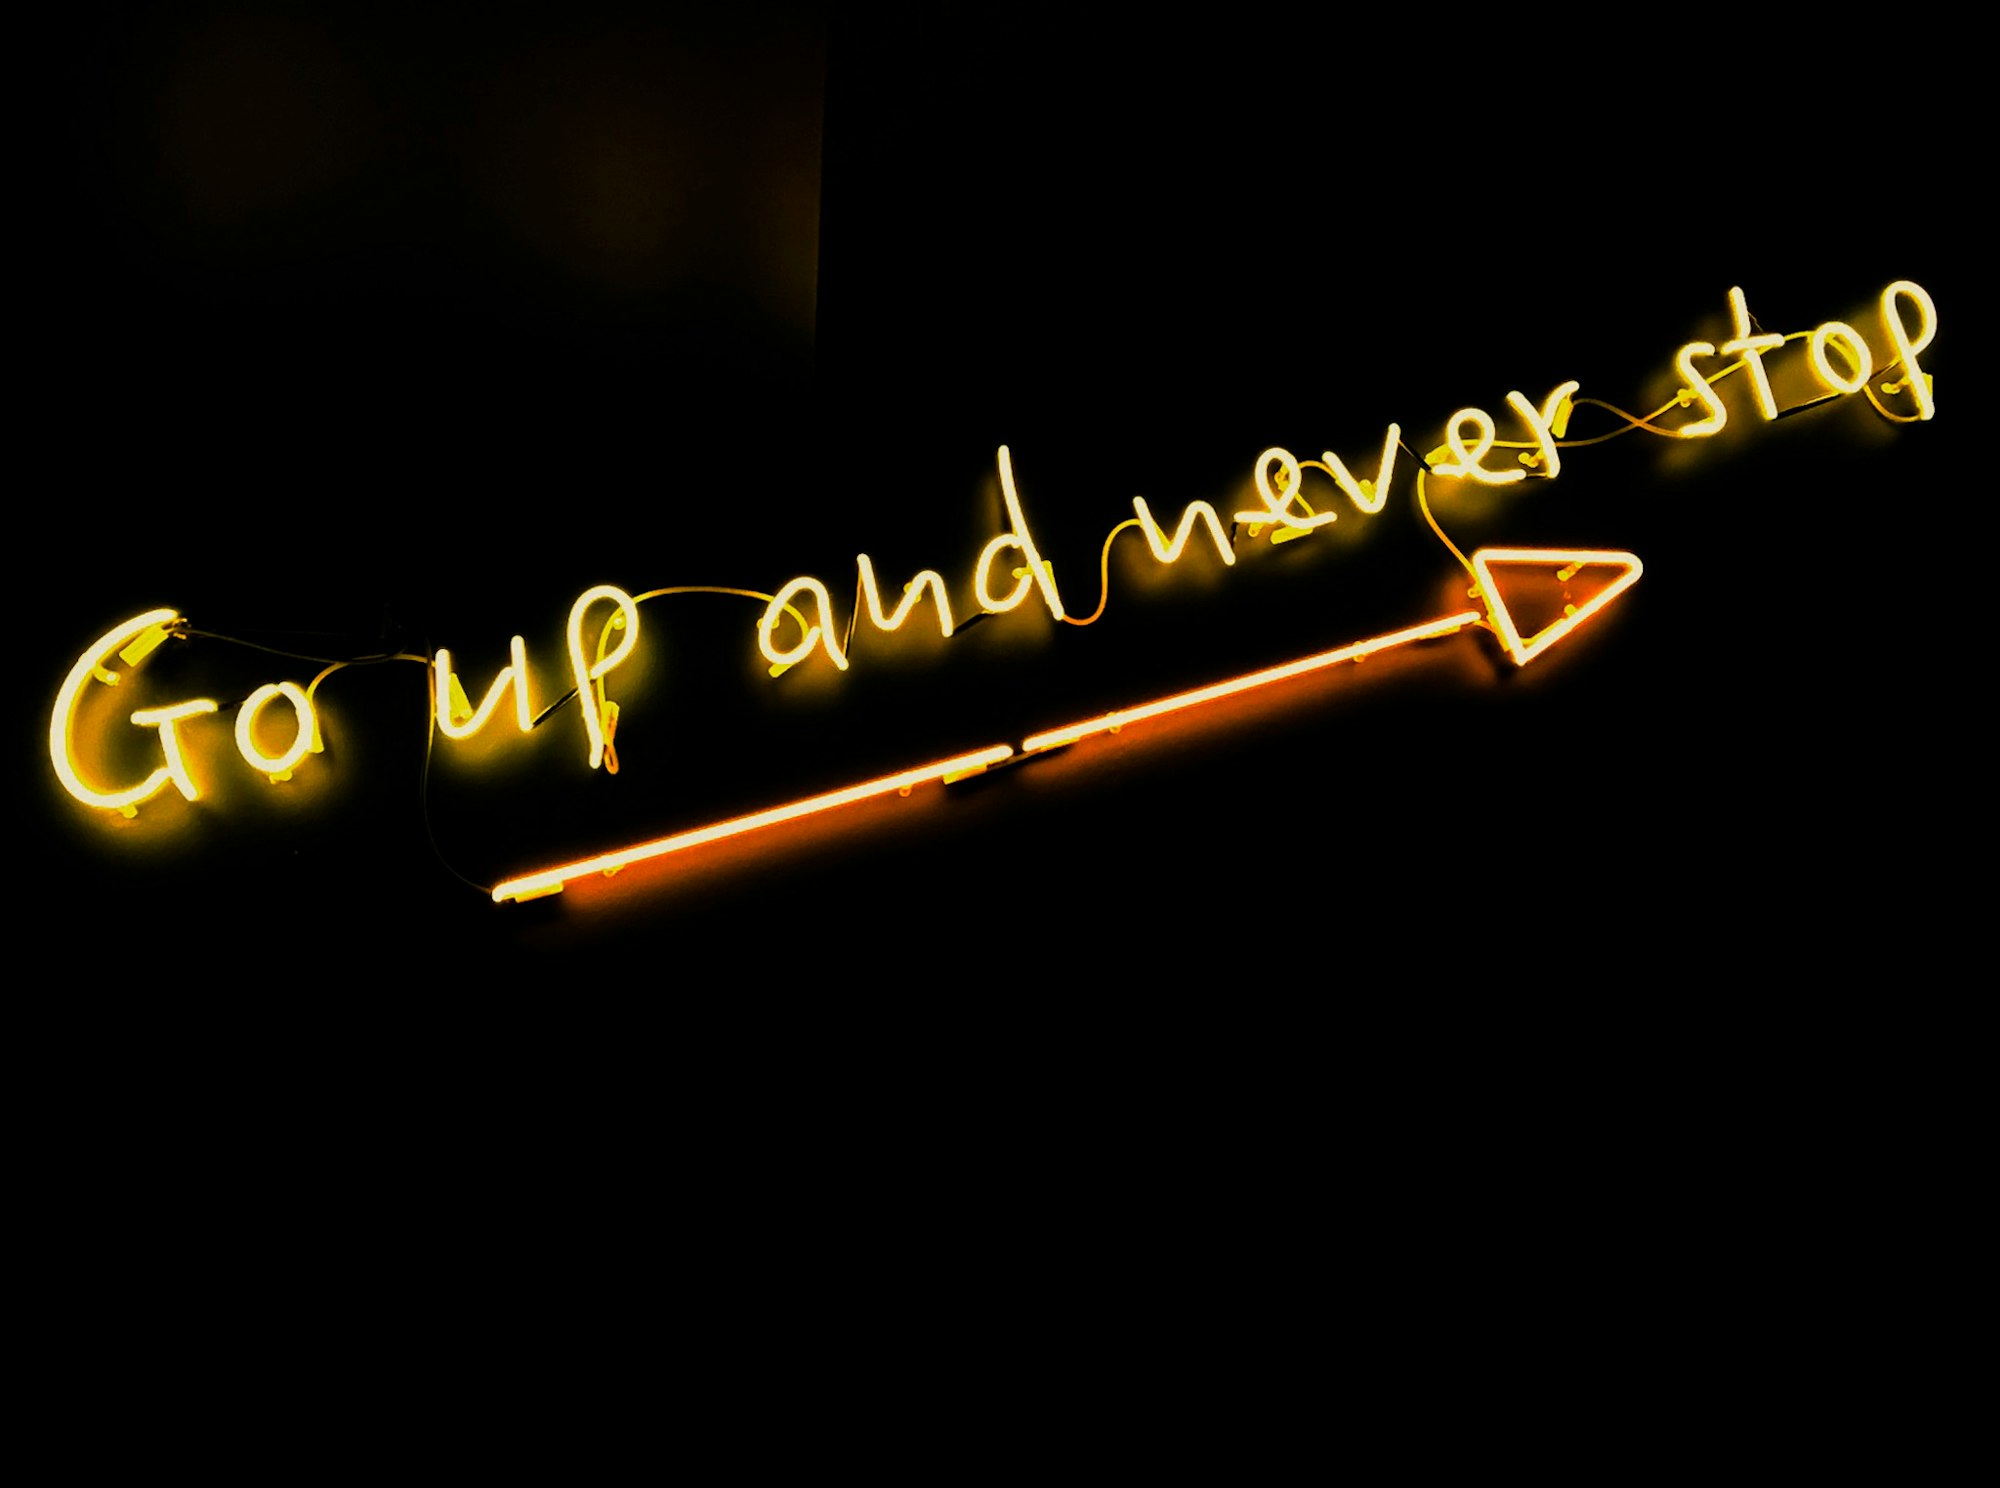 "Go up and never stop" neon sign with an arrow pointing diagonally upwards